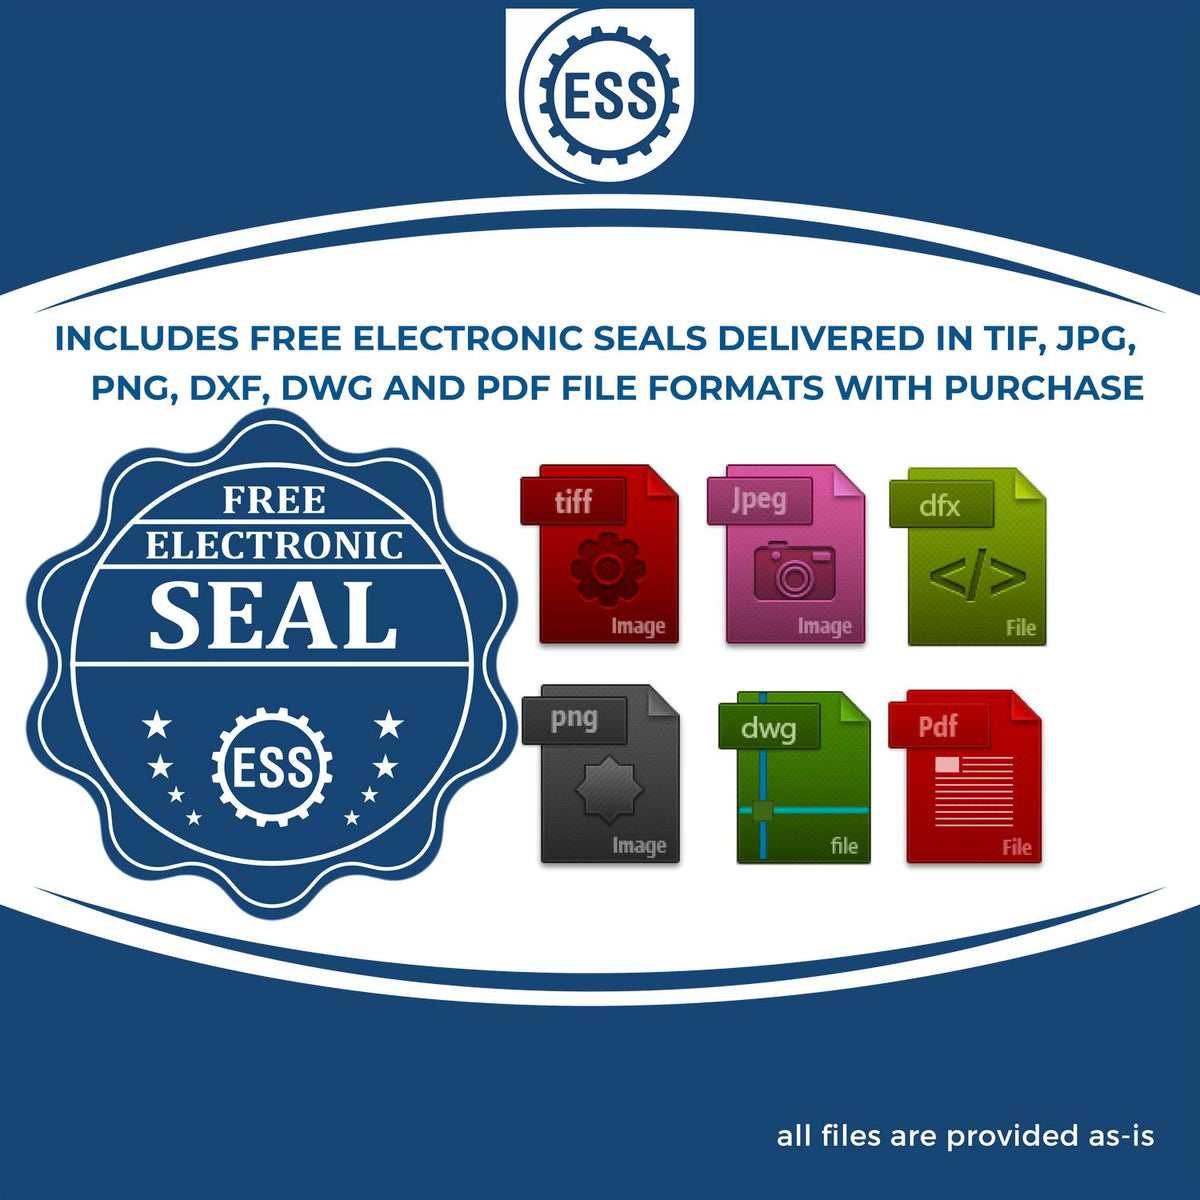 An infographic for the free electronic seal for the Self-Inking State Seal Louisiana Notary Stamp illustrating the different file type icons such as DXF, DWG, TIF, JPG and PNG.